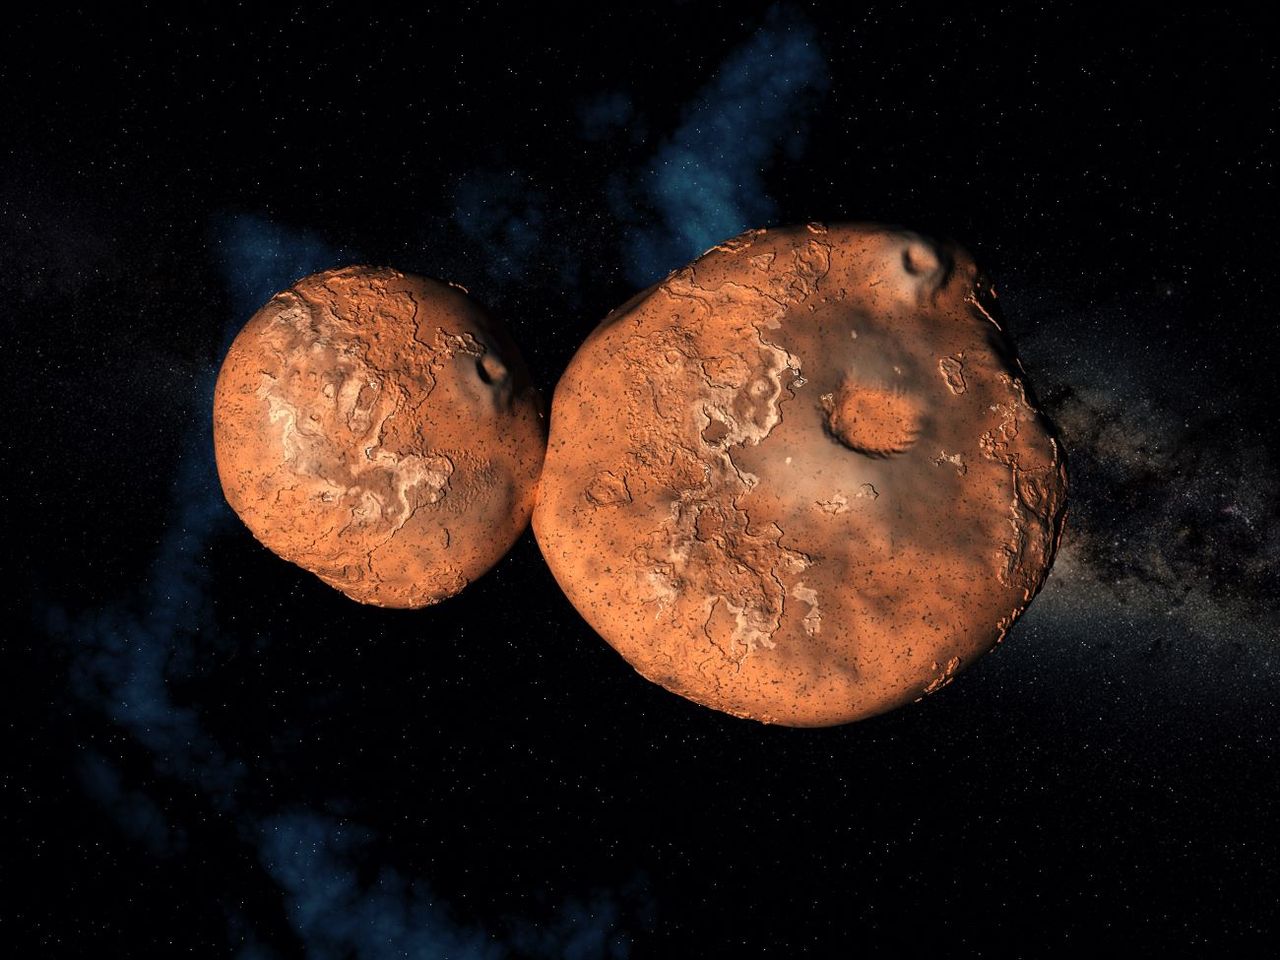 Arrokoth, the farthest trans-Neptunian object ever visited by a probe